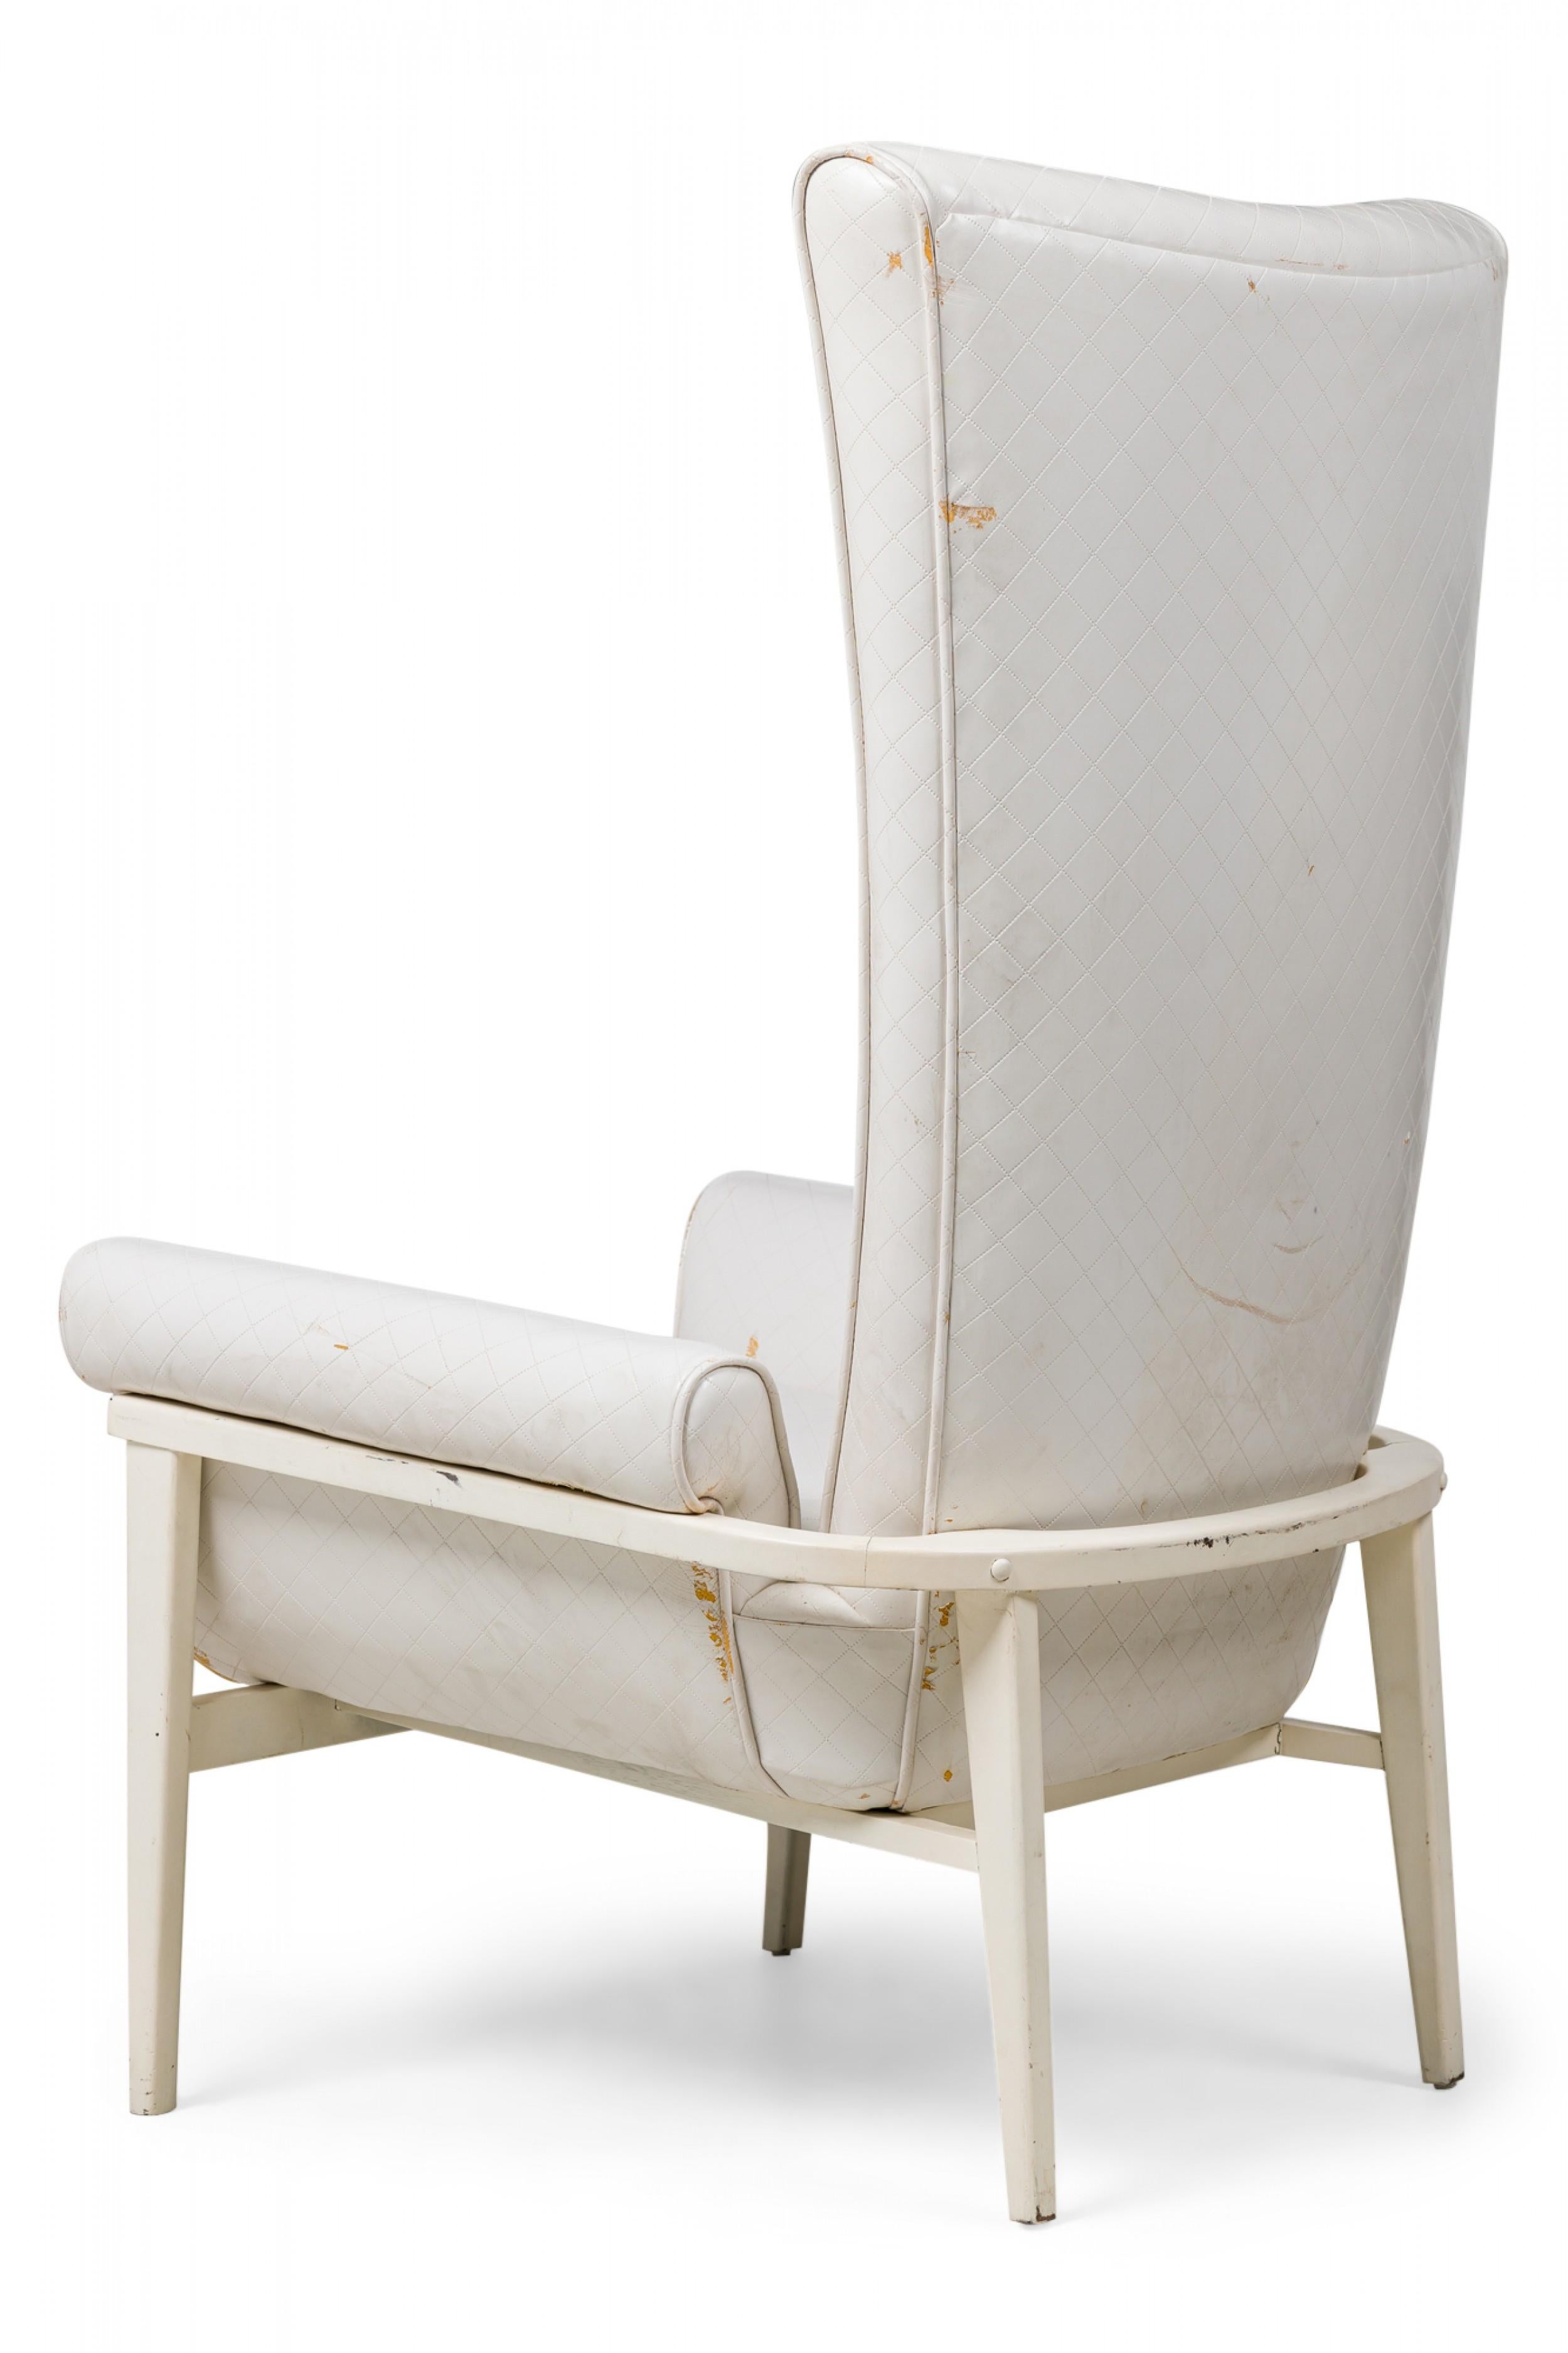 James Mont American High Back, Button Tufted White Lacquered Lounge/Armchair In Good Condition For Sale In New York, NY